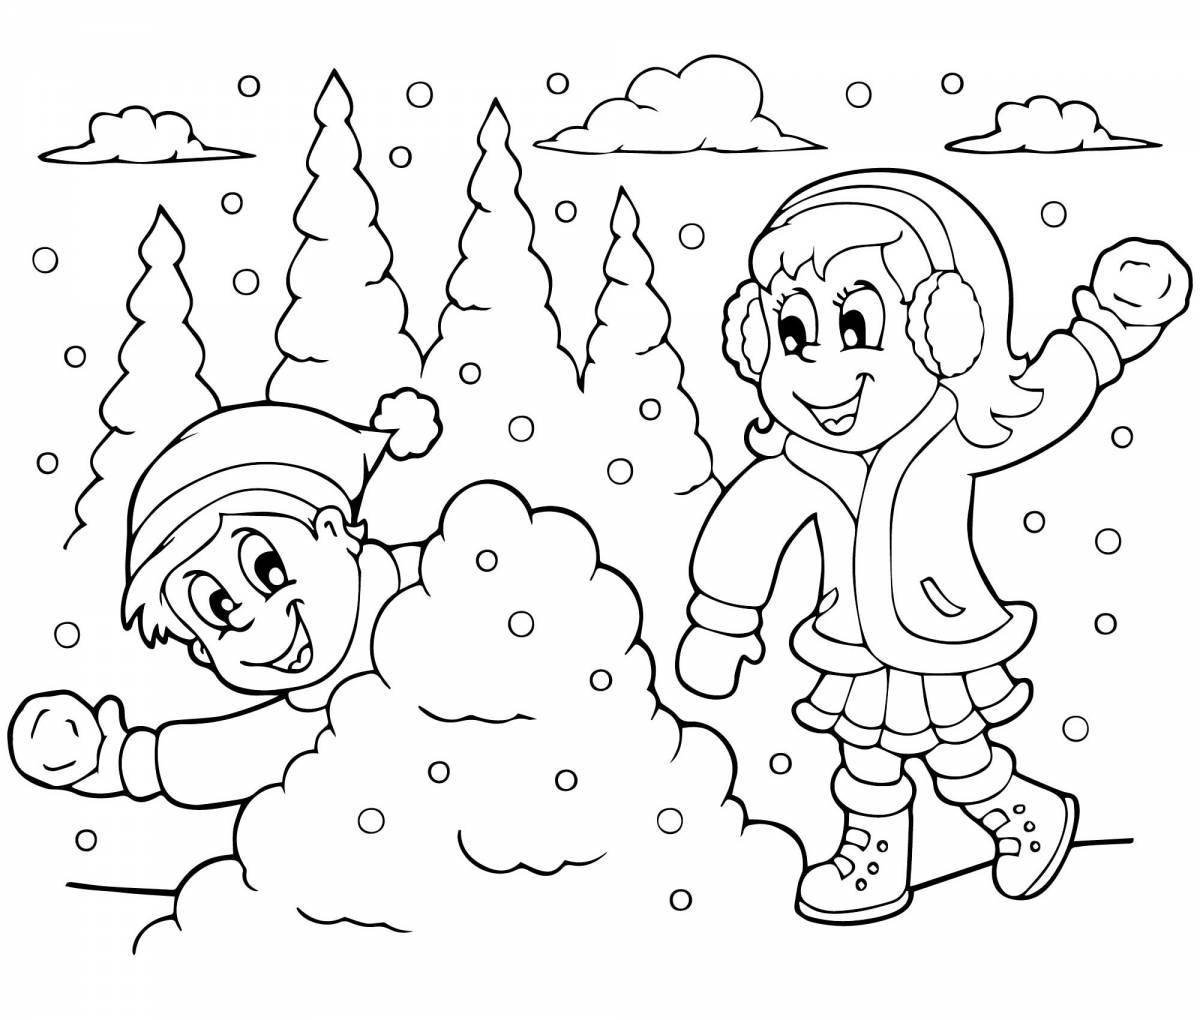 Coloring pages children have fun in winter